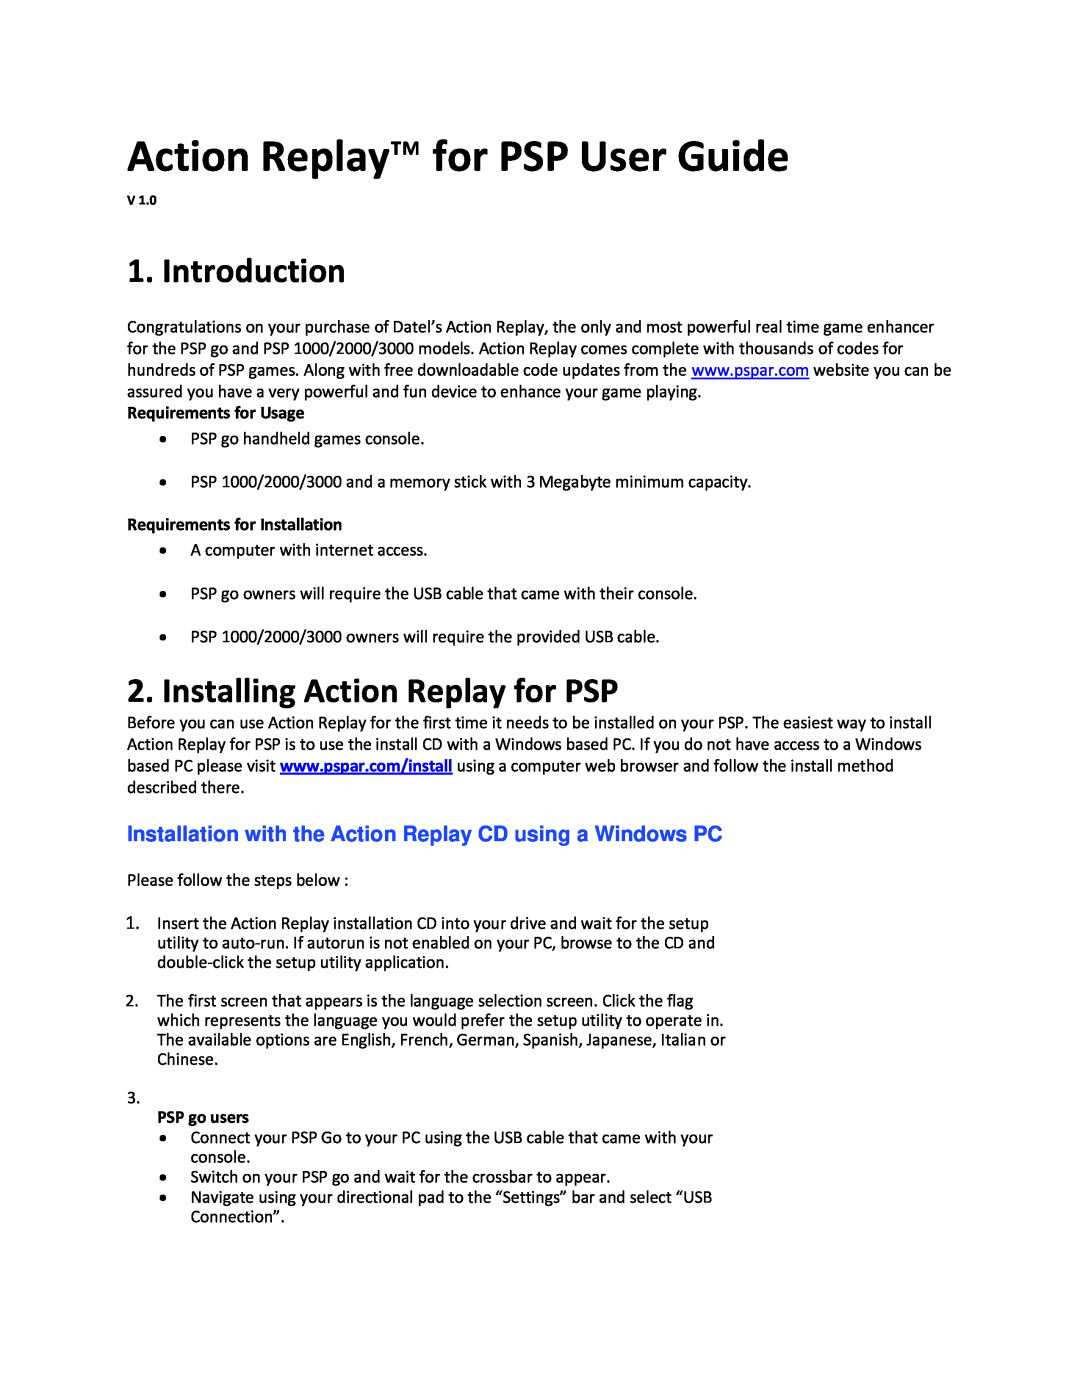 Datel PSP 1000, PSP 3000, PSP 2000 manual Action Replay for PSP User Guide, Introduction, Installing Action Replay for PSP 